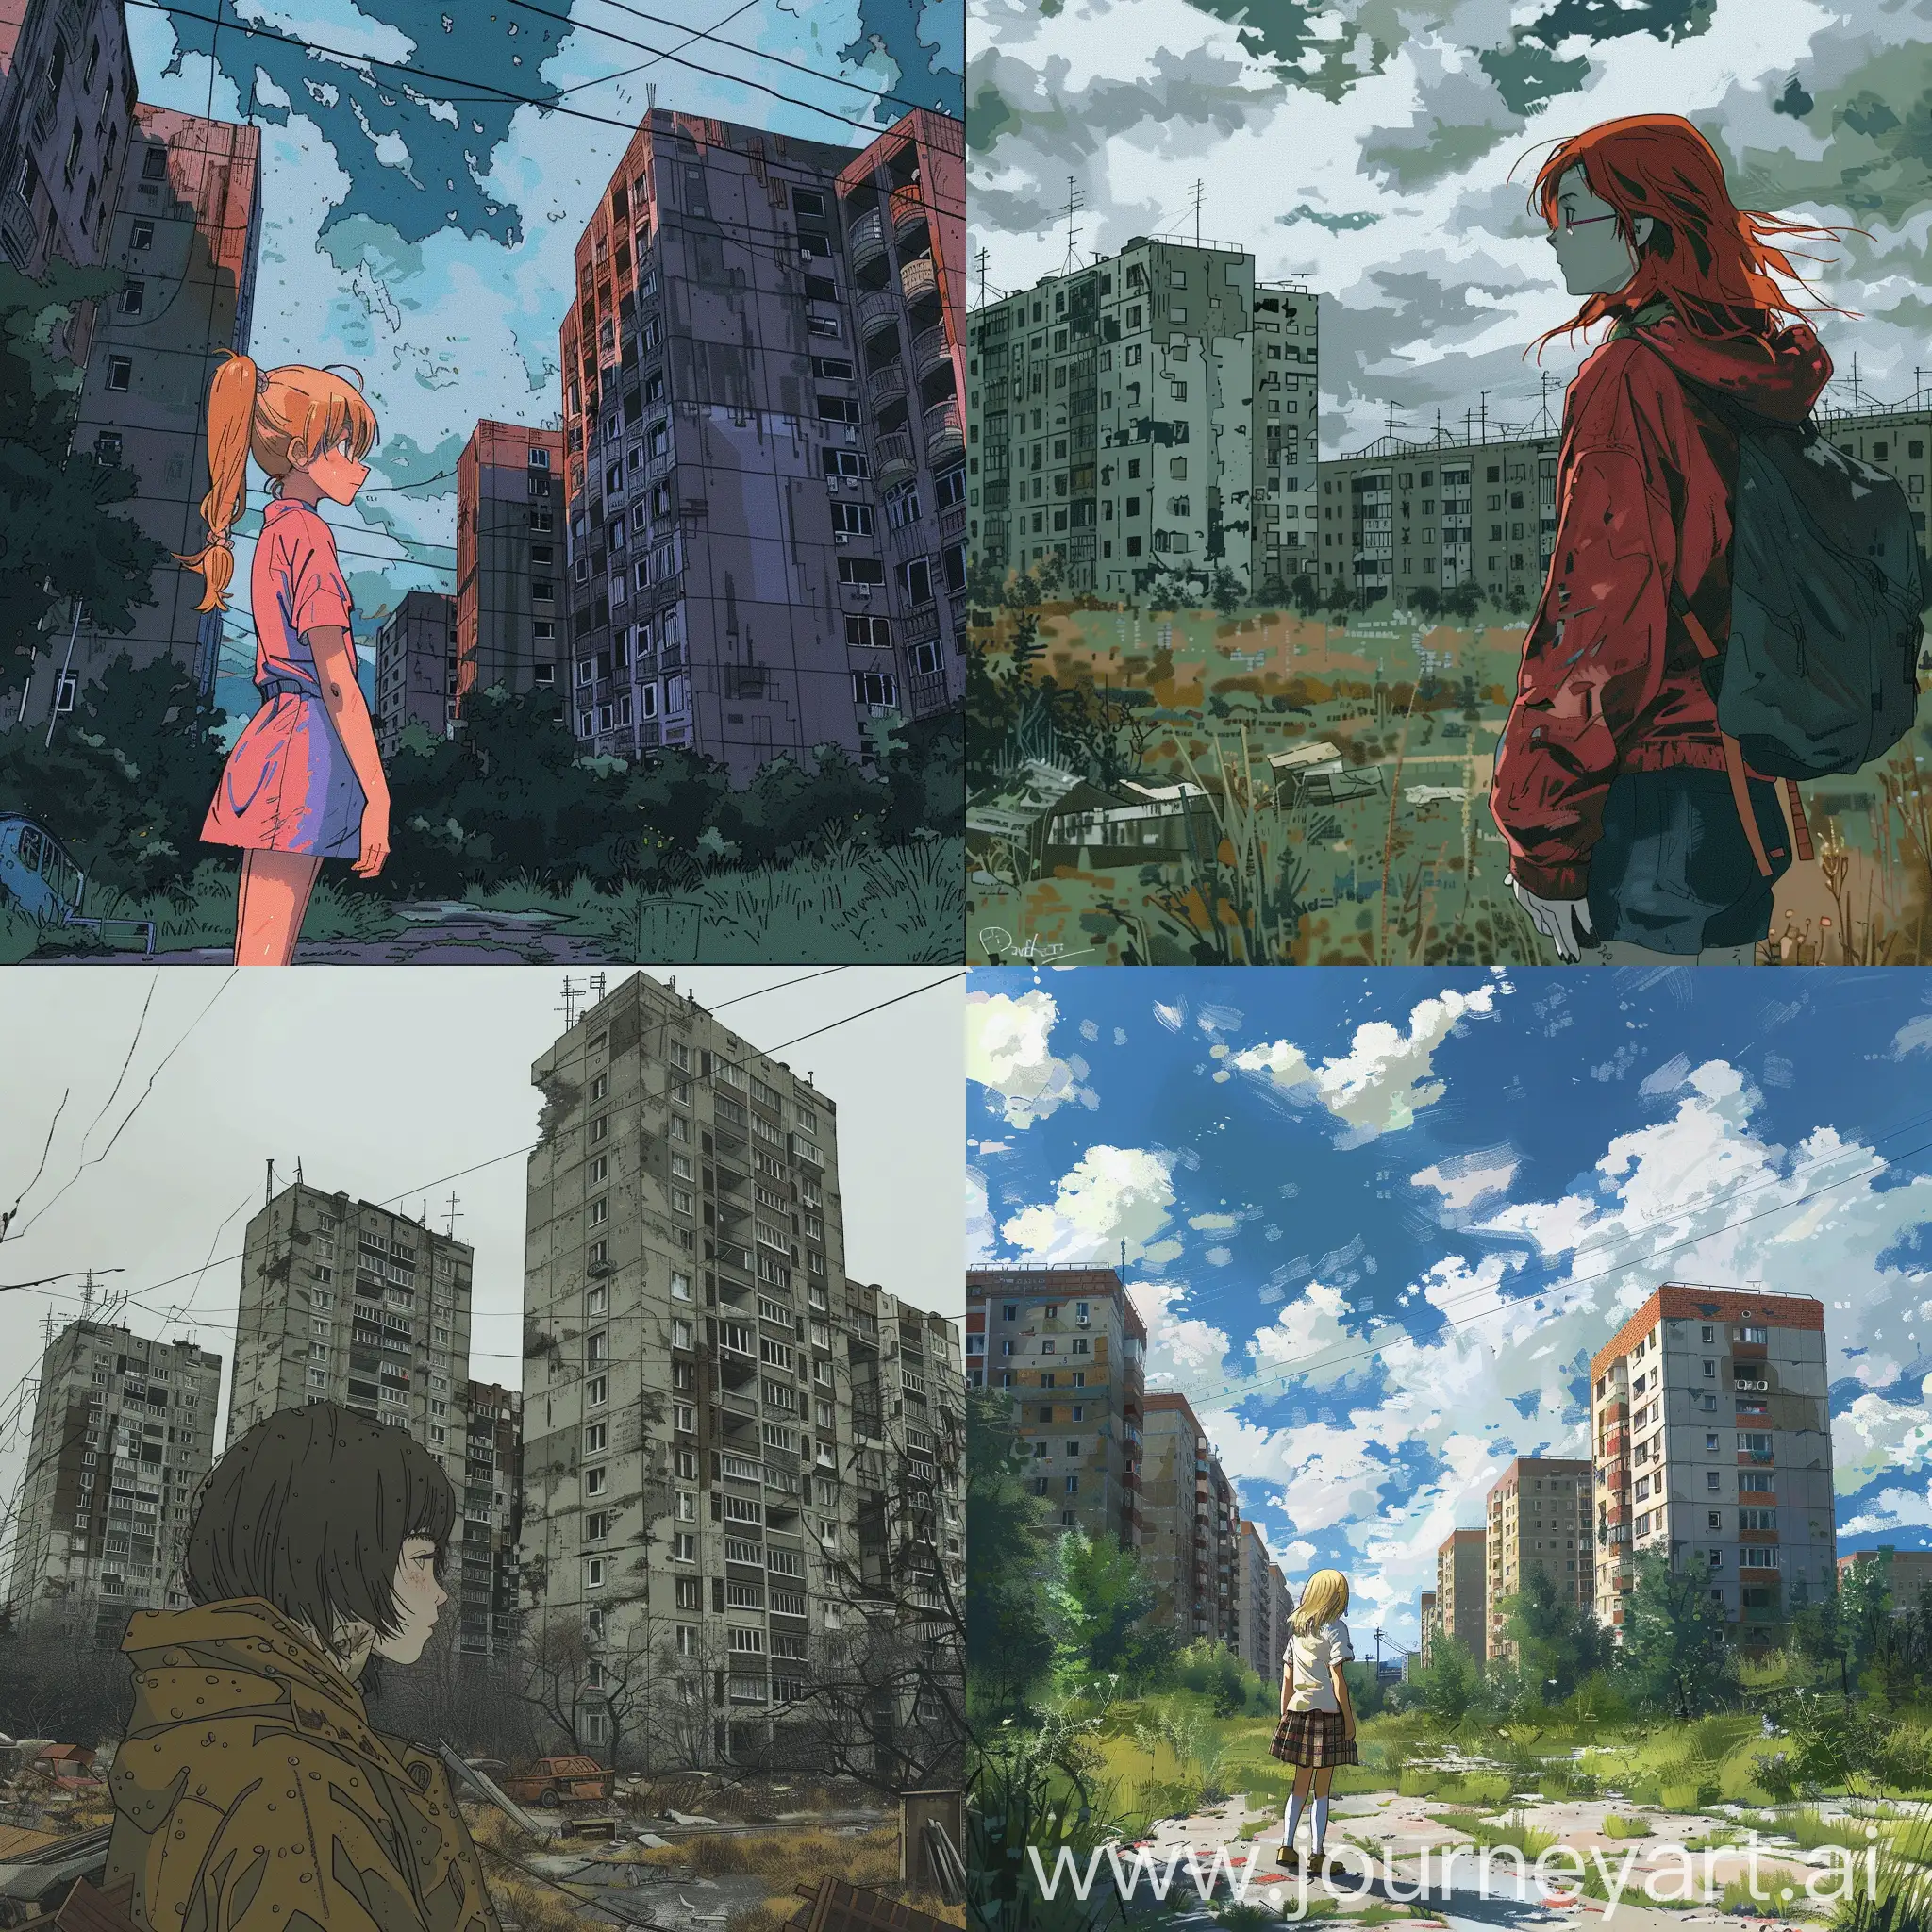 Anime-Girl-Against-Housing-Development-in-1999-Russia-Ambient-Style